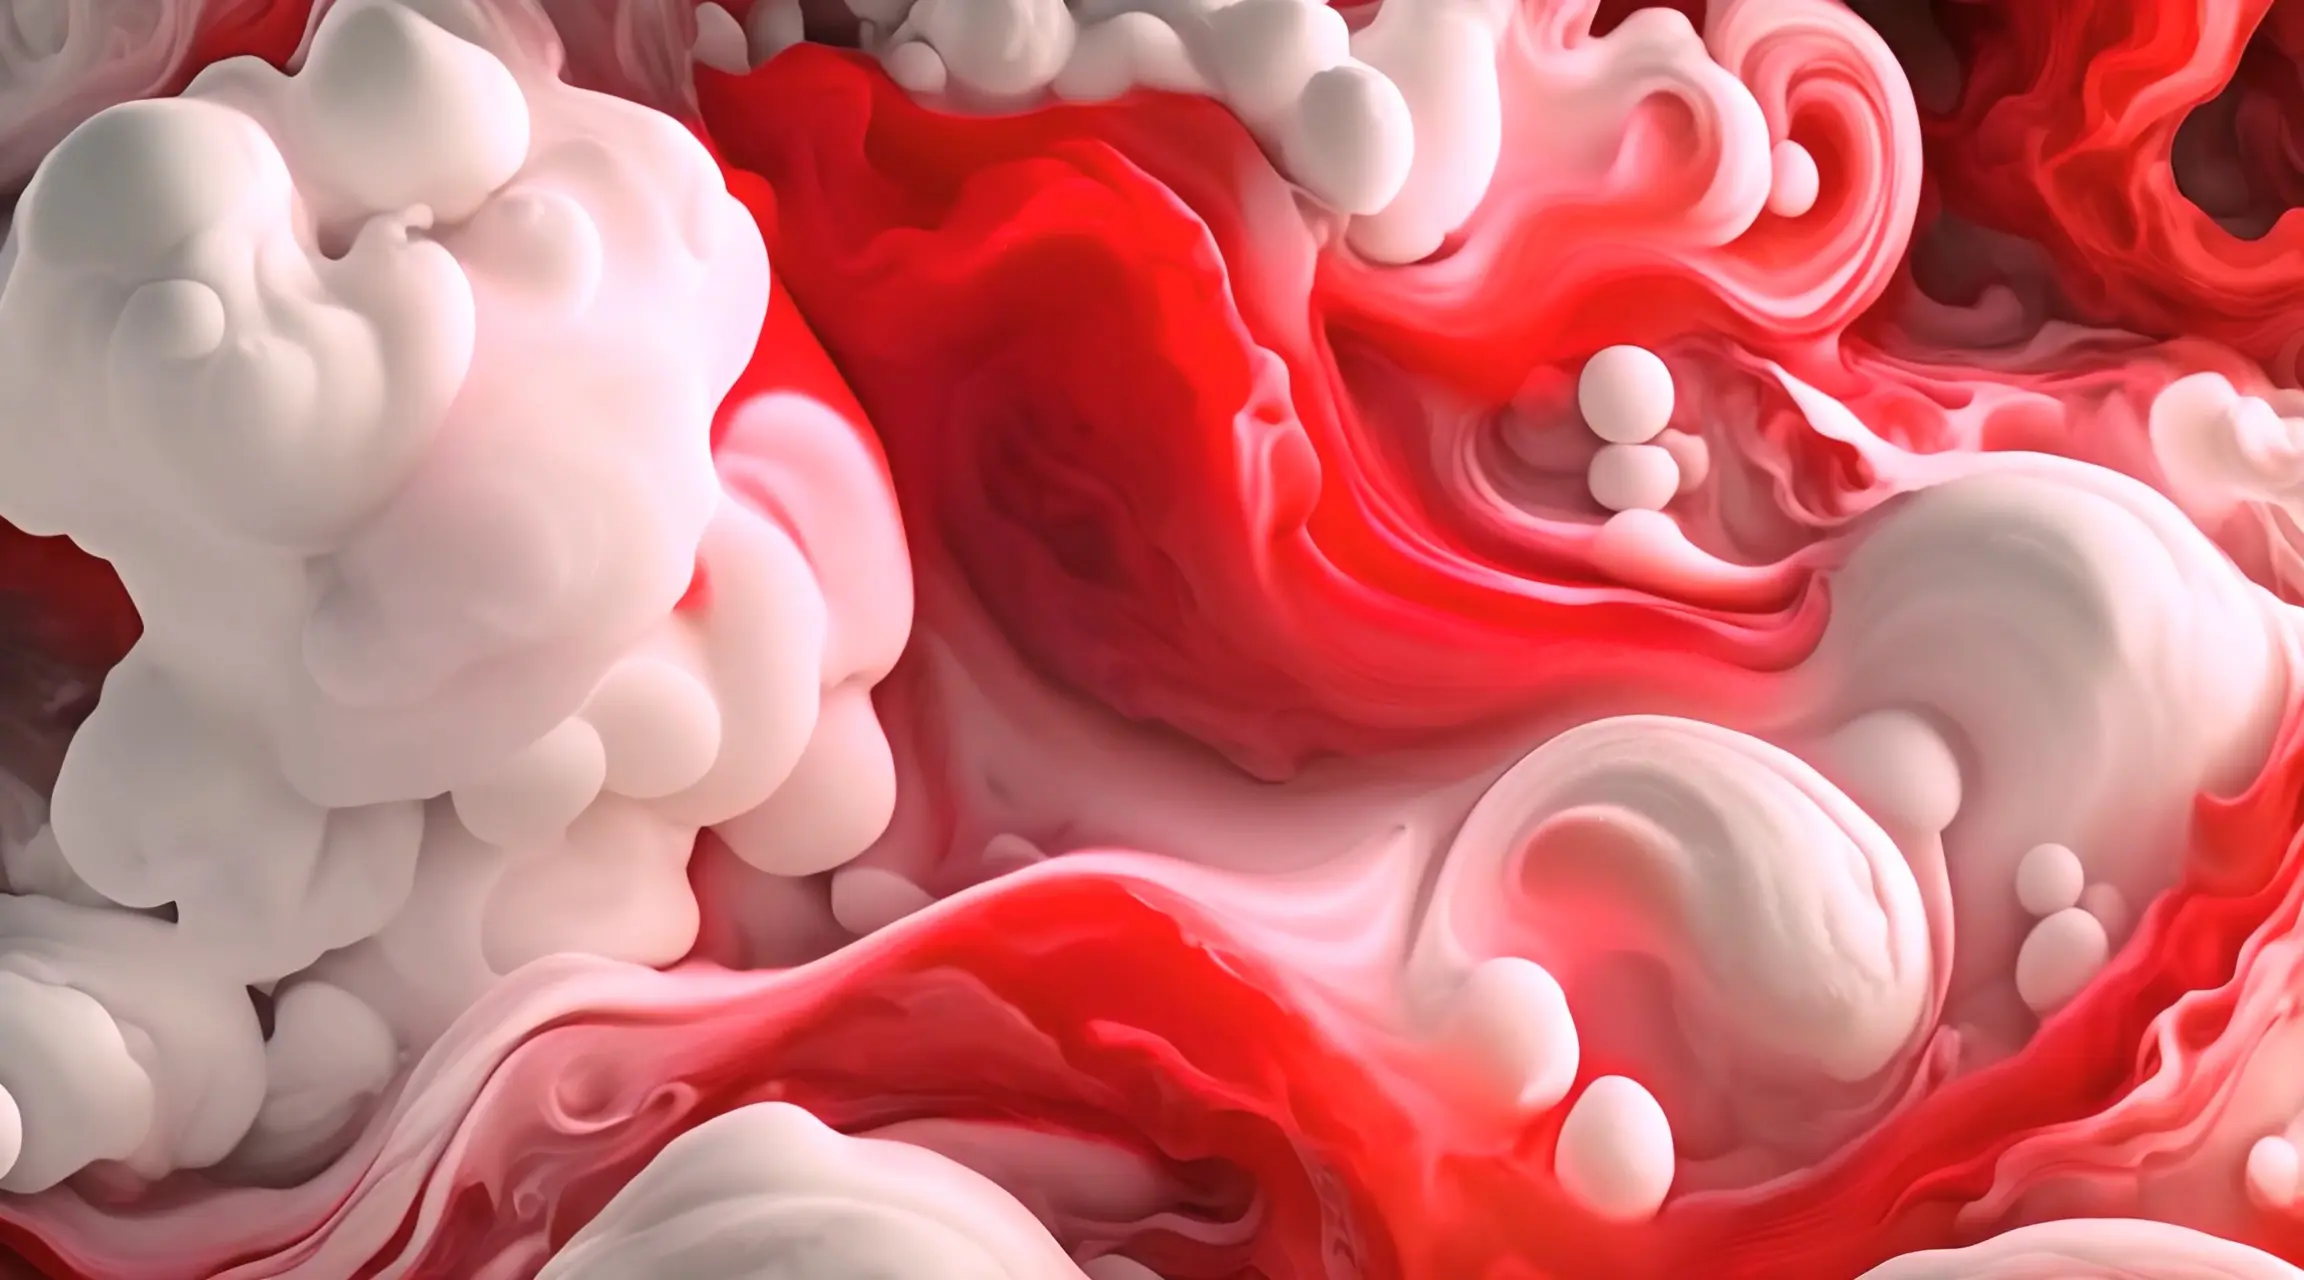 Red and White Liquids Fluid Dynamics Video